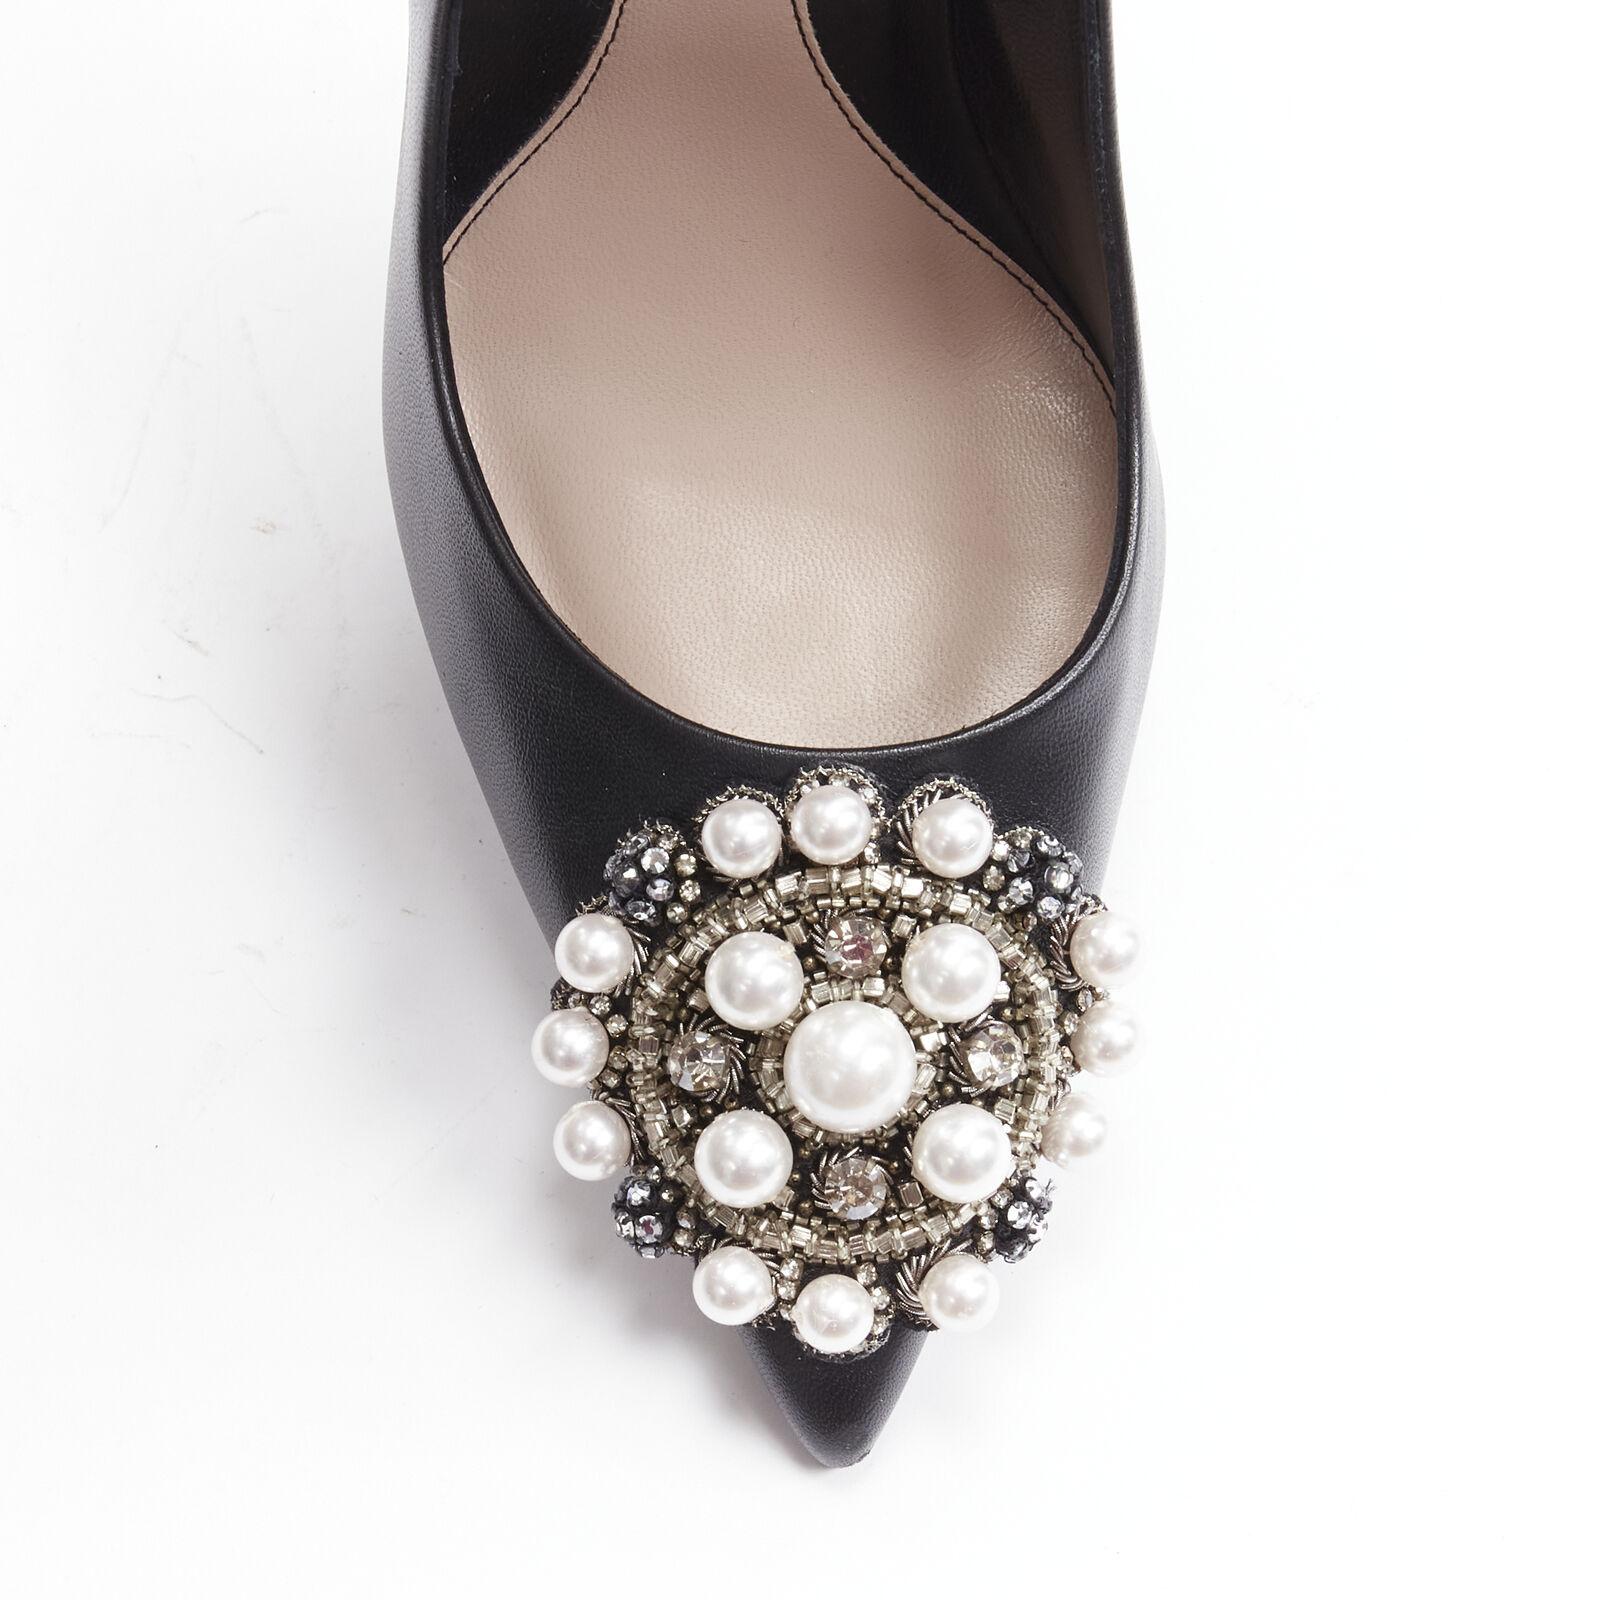 ALEXANDER MCQUEEN black pearl metal embellished stiletto pumps EU39 US9
Reference: AAWC/A00128
Brand: Alexander McQueen
Material: Leather
Color: Black
Pattern: Solid
Closure: Slip On
Lining: Leather
Made in: Italy

CONDITION:
Condition: Very good,